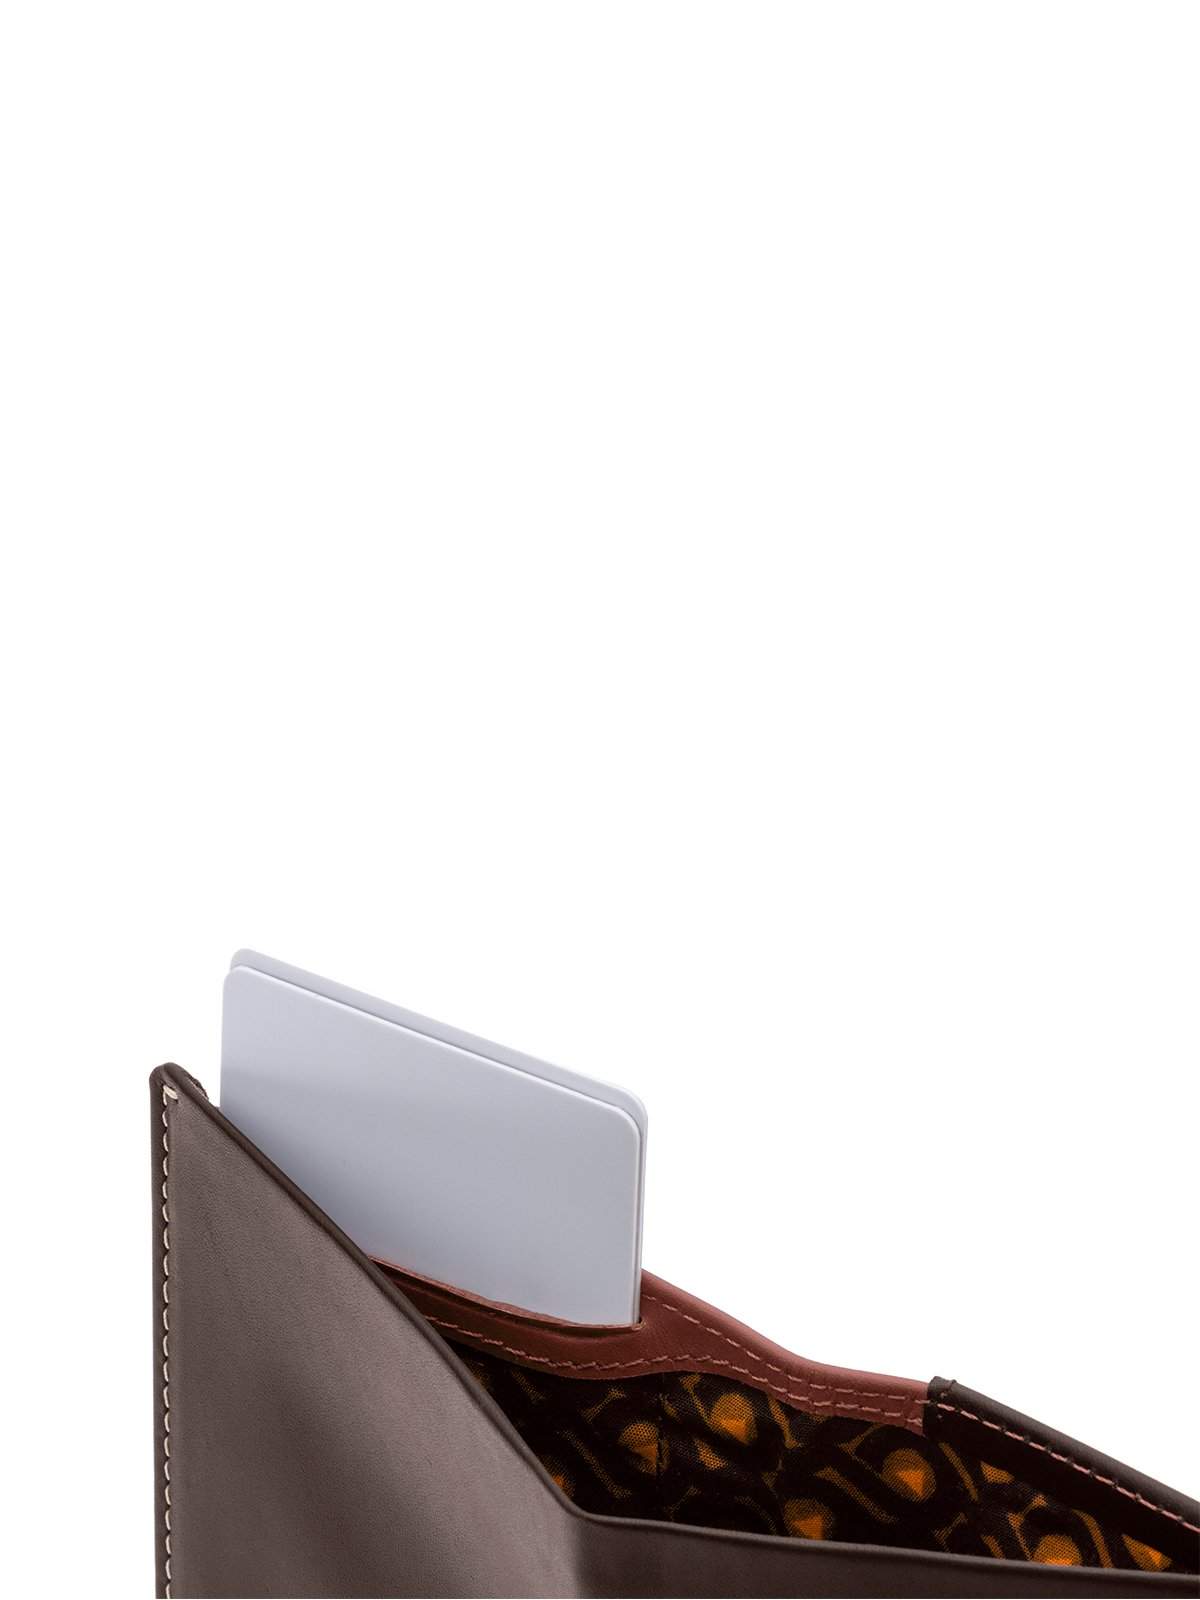 Bellroy Note Sleeve Wallet Java - MORE by Morello Indonesia